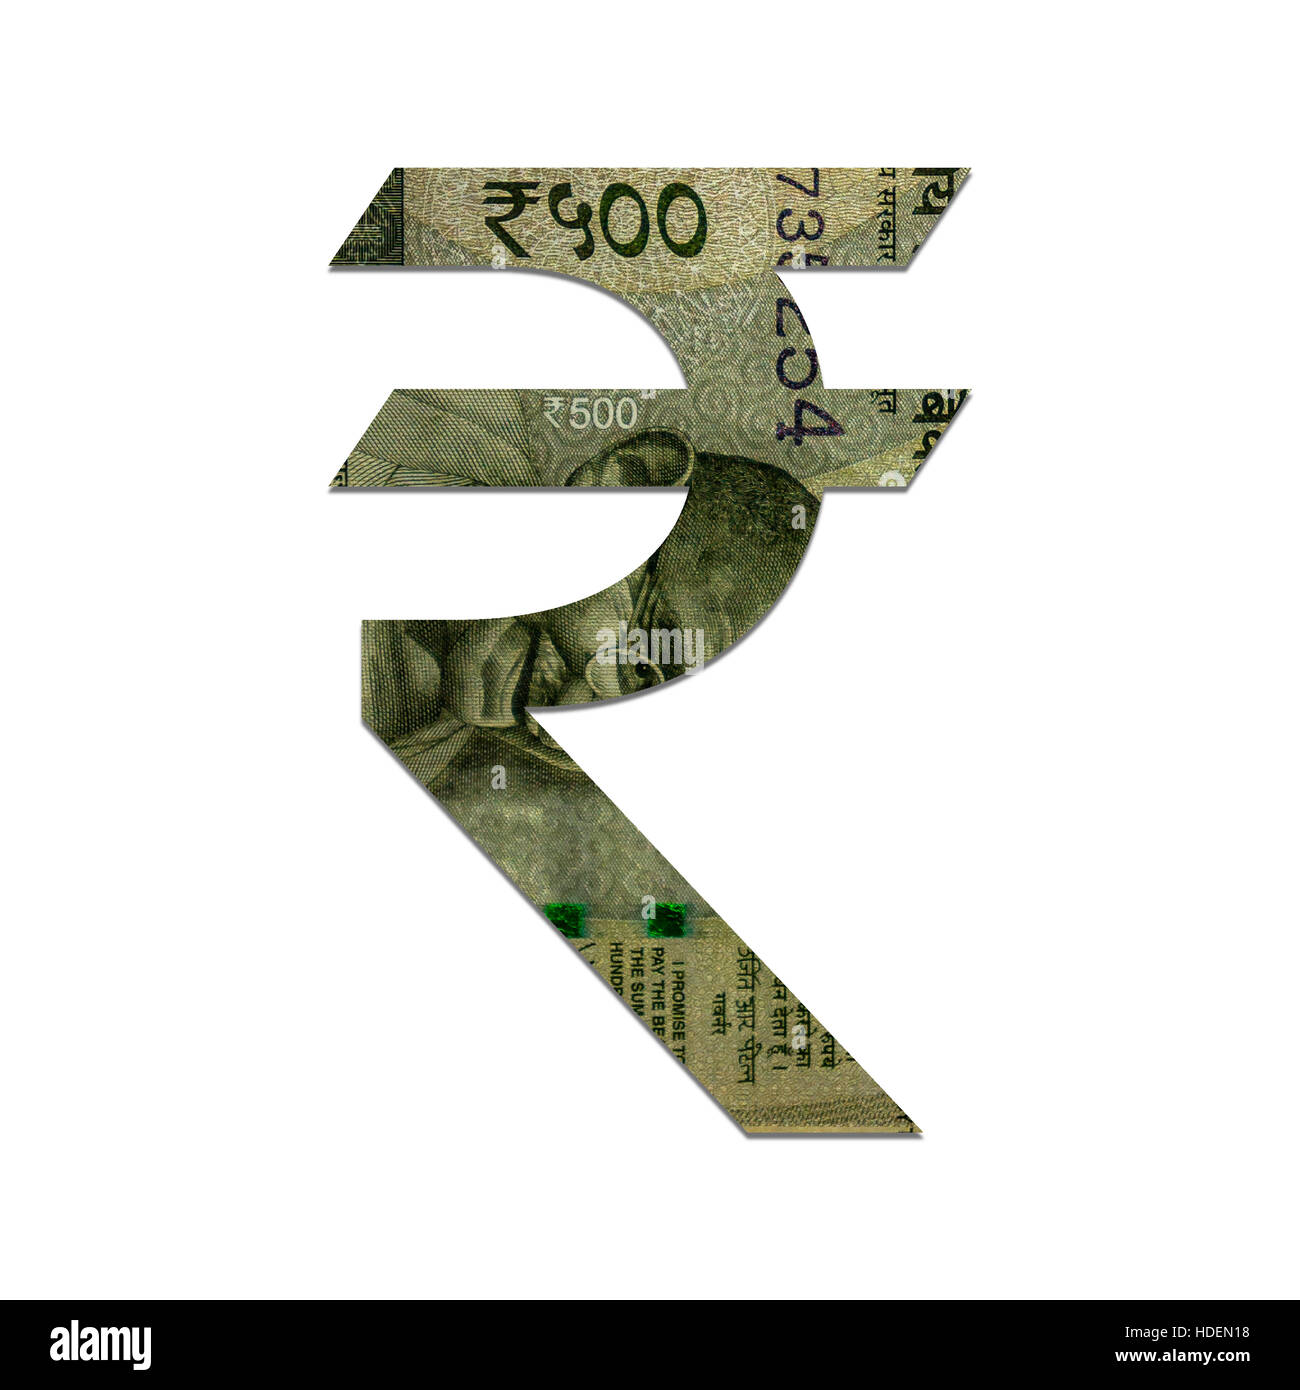 an illustration of new 500 rupee currency note in rupee symbol Stock Photo